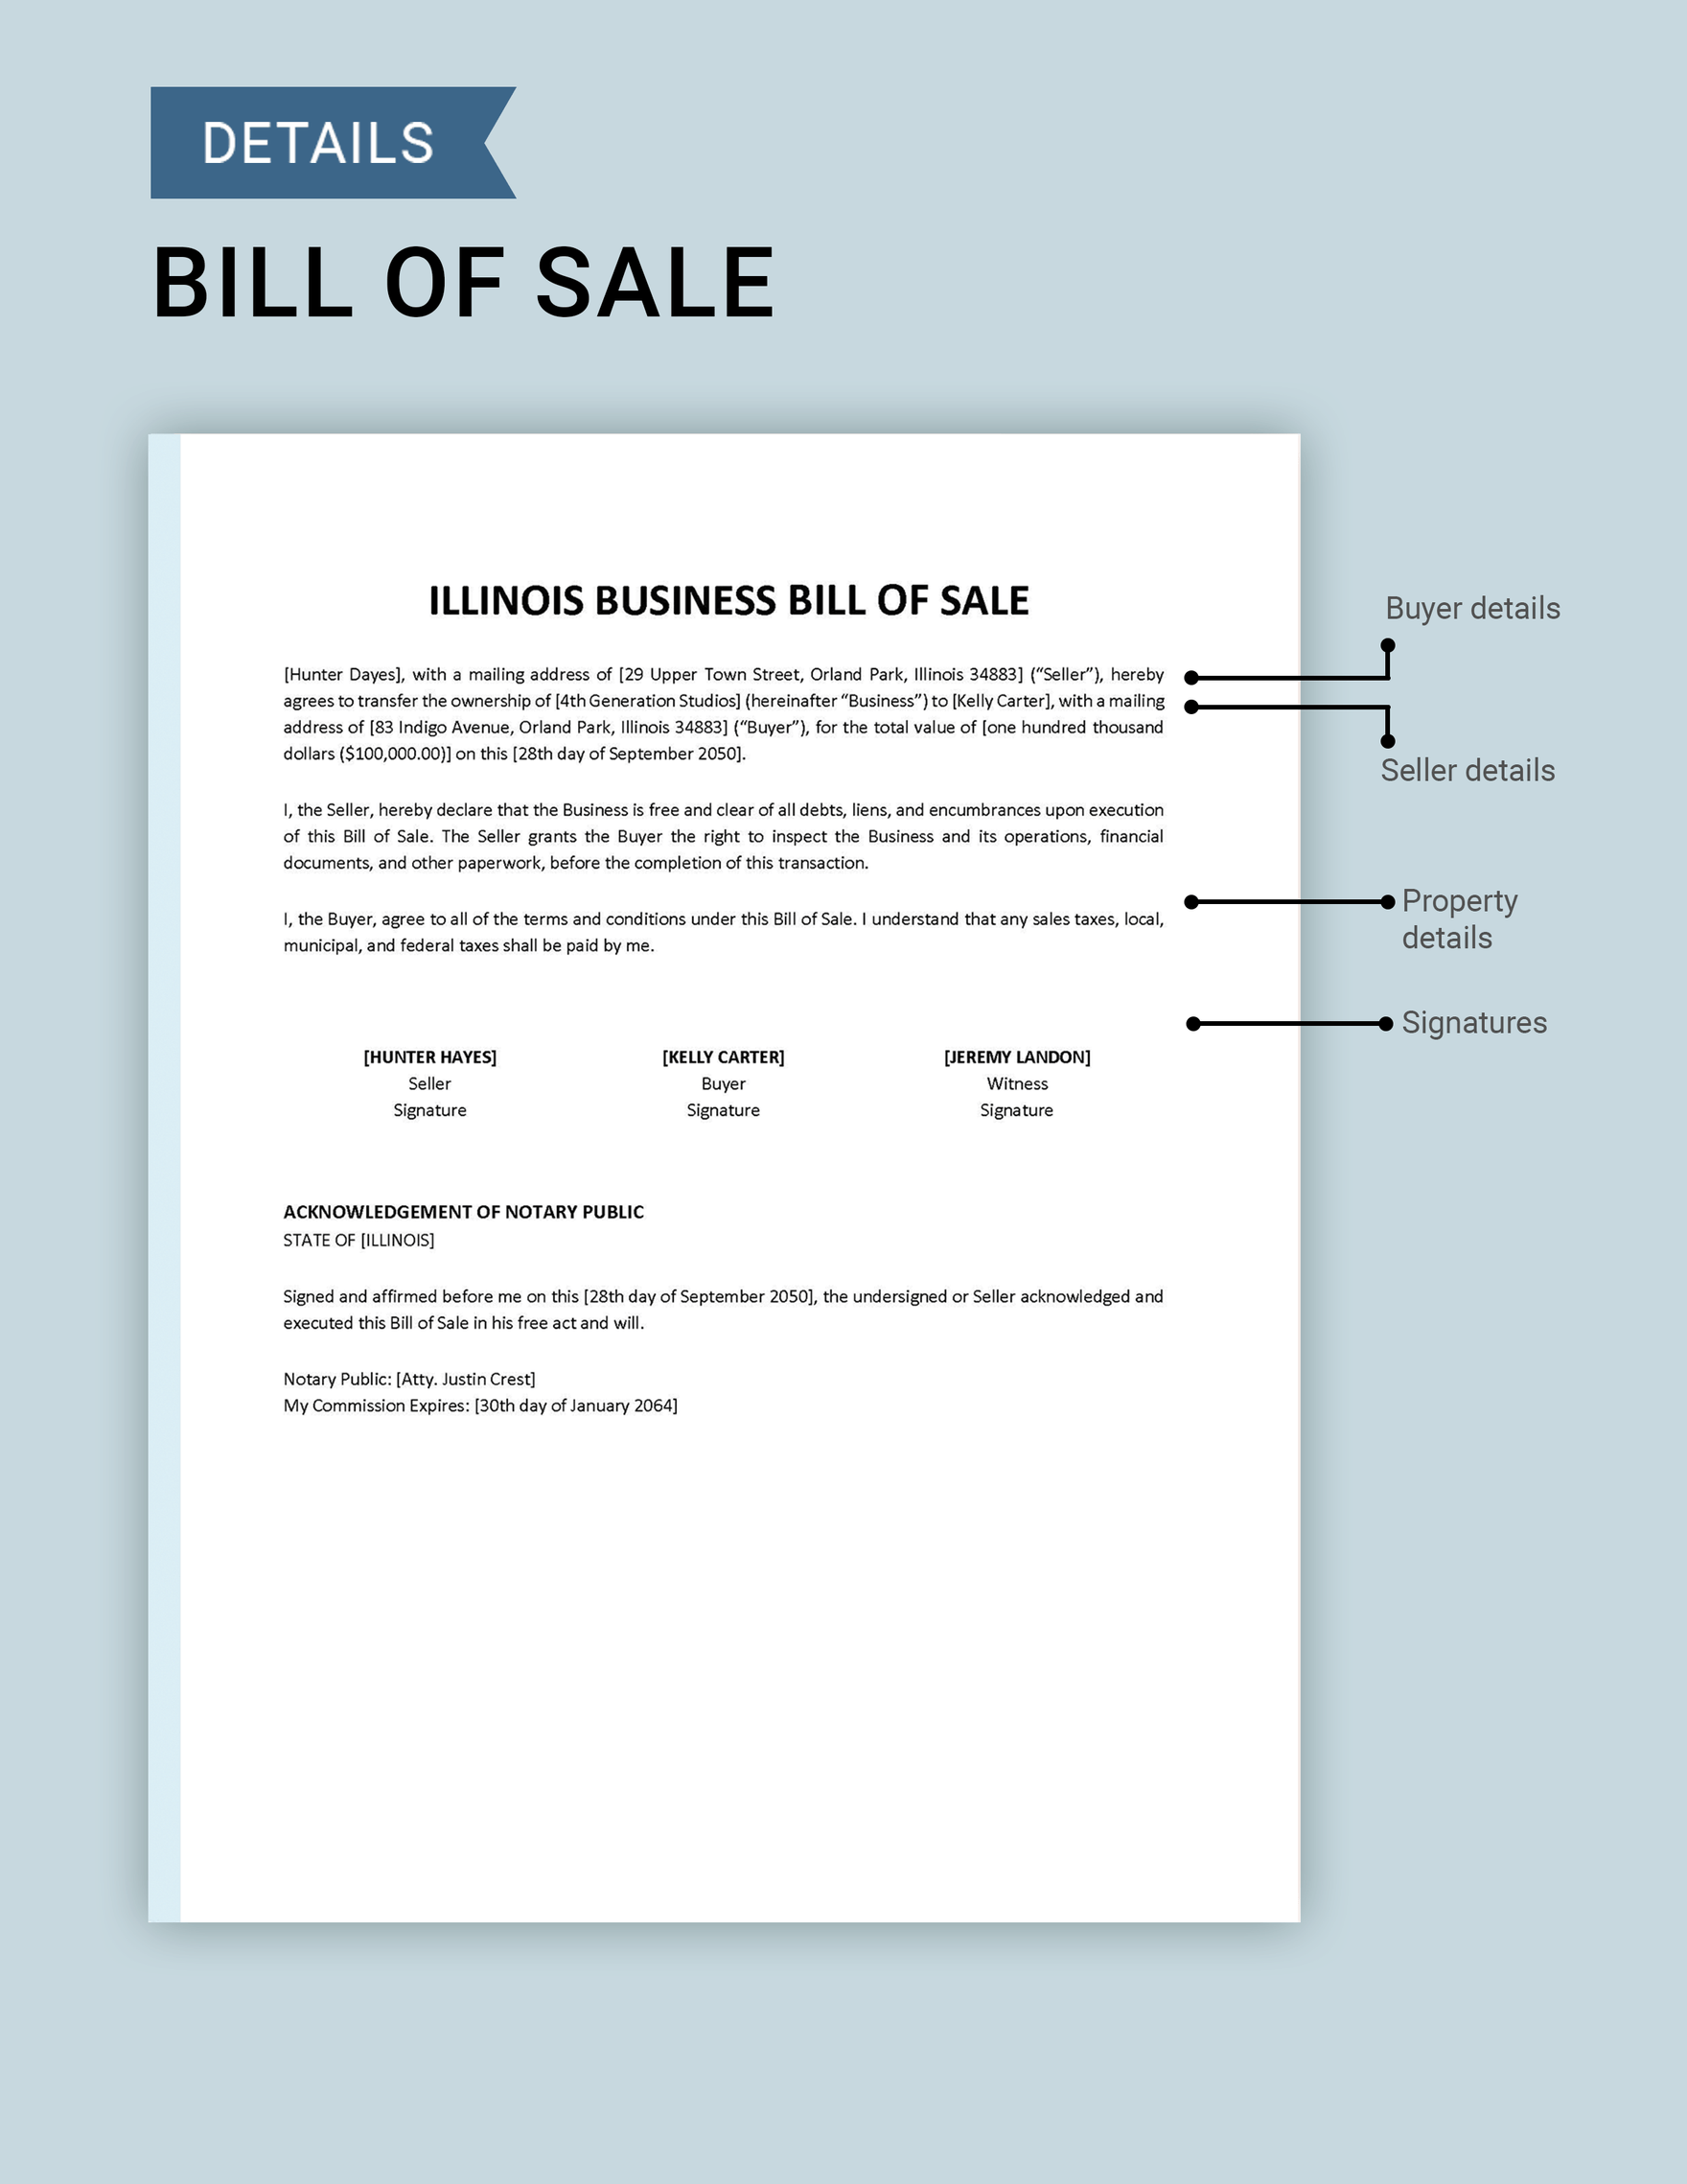 Illinois Business Bill of Sale Template